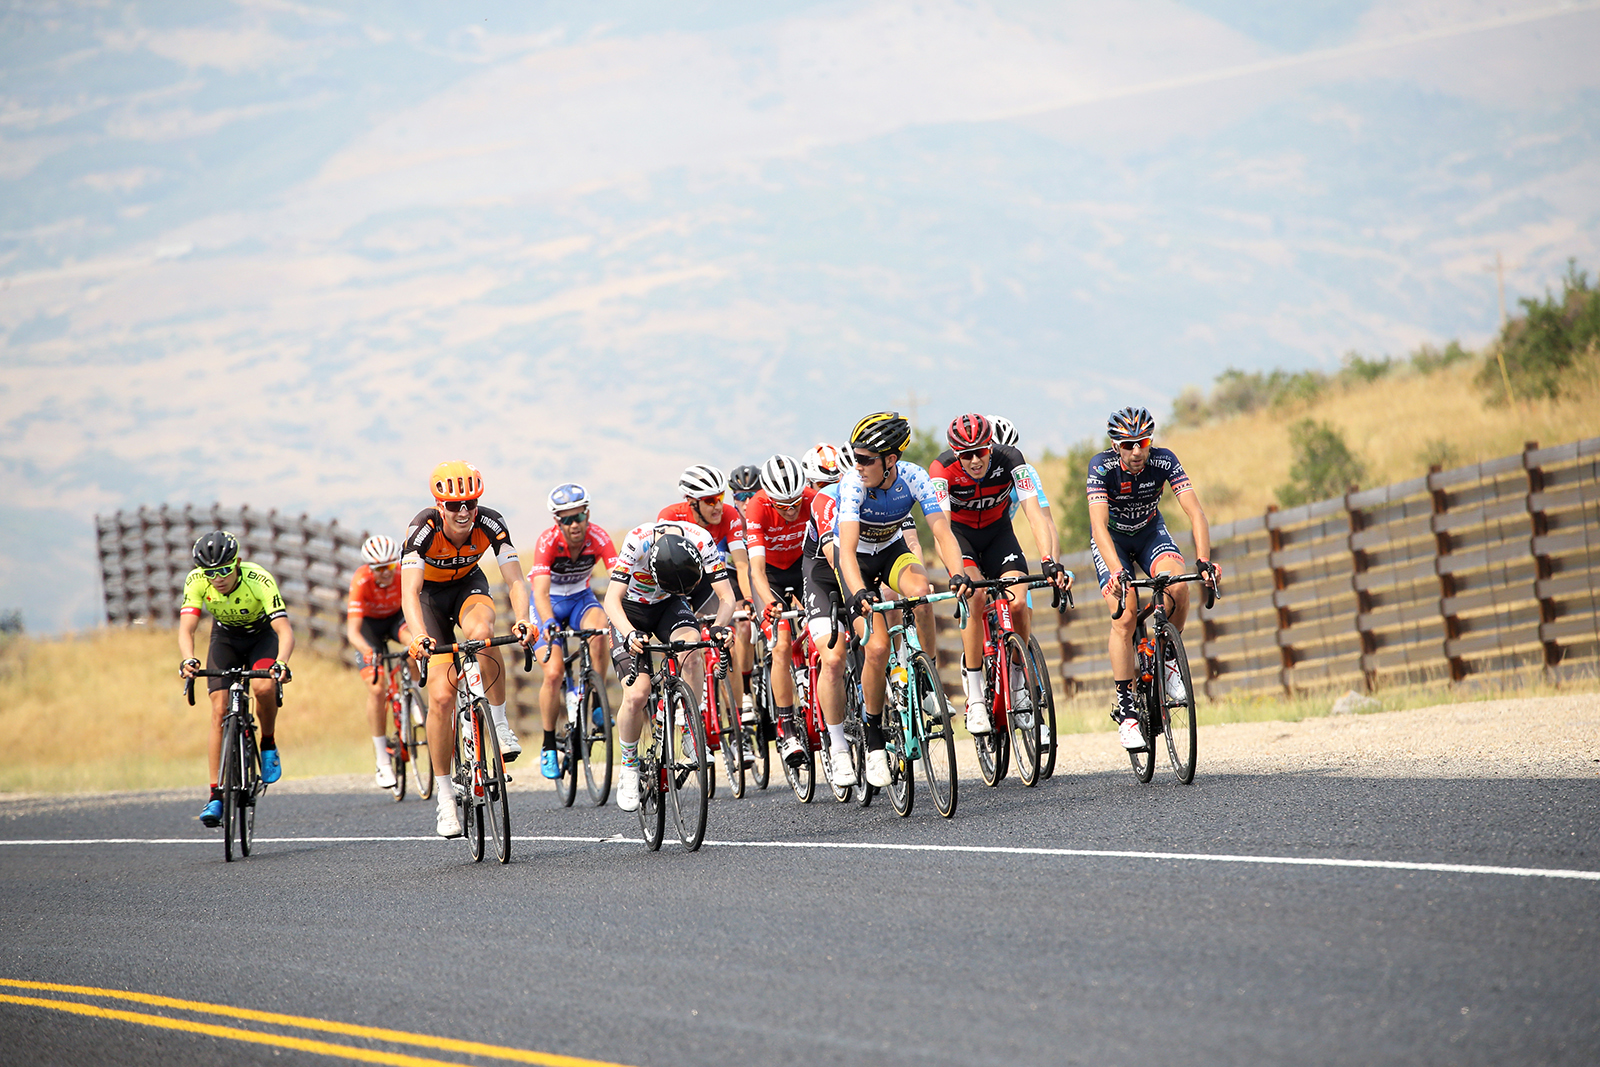 With the insane headwind, the field shattered for a while. Stage 5 of the 2018 Tour of Utah, August 10, 2018. Photo by Cathy Fegan-Kim, www.cottonsoxphotography.net